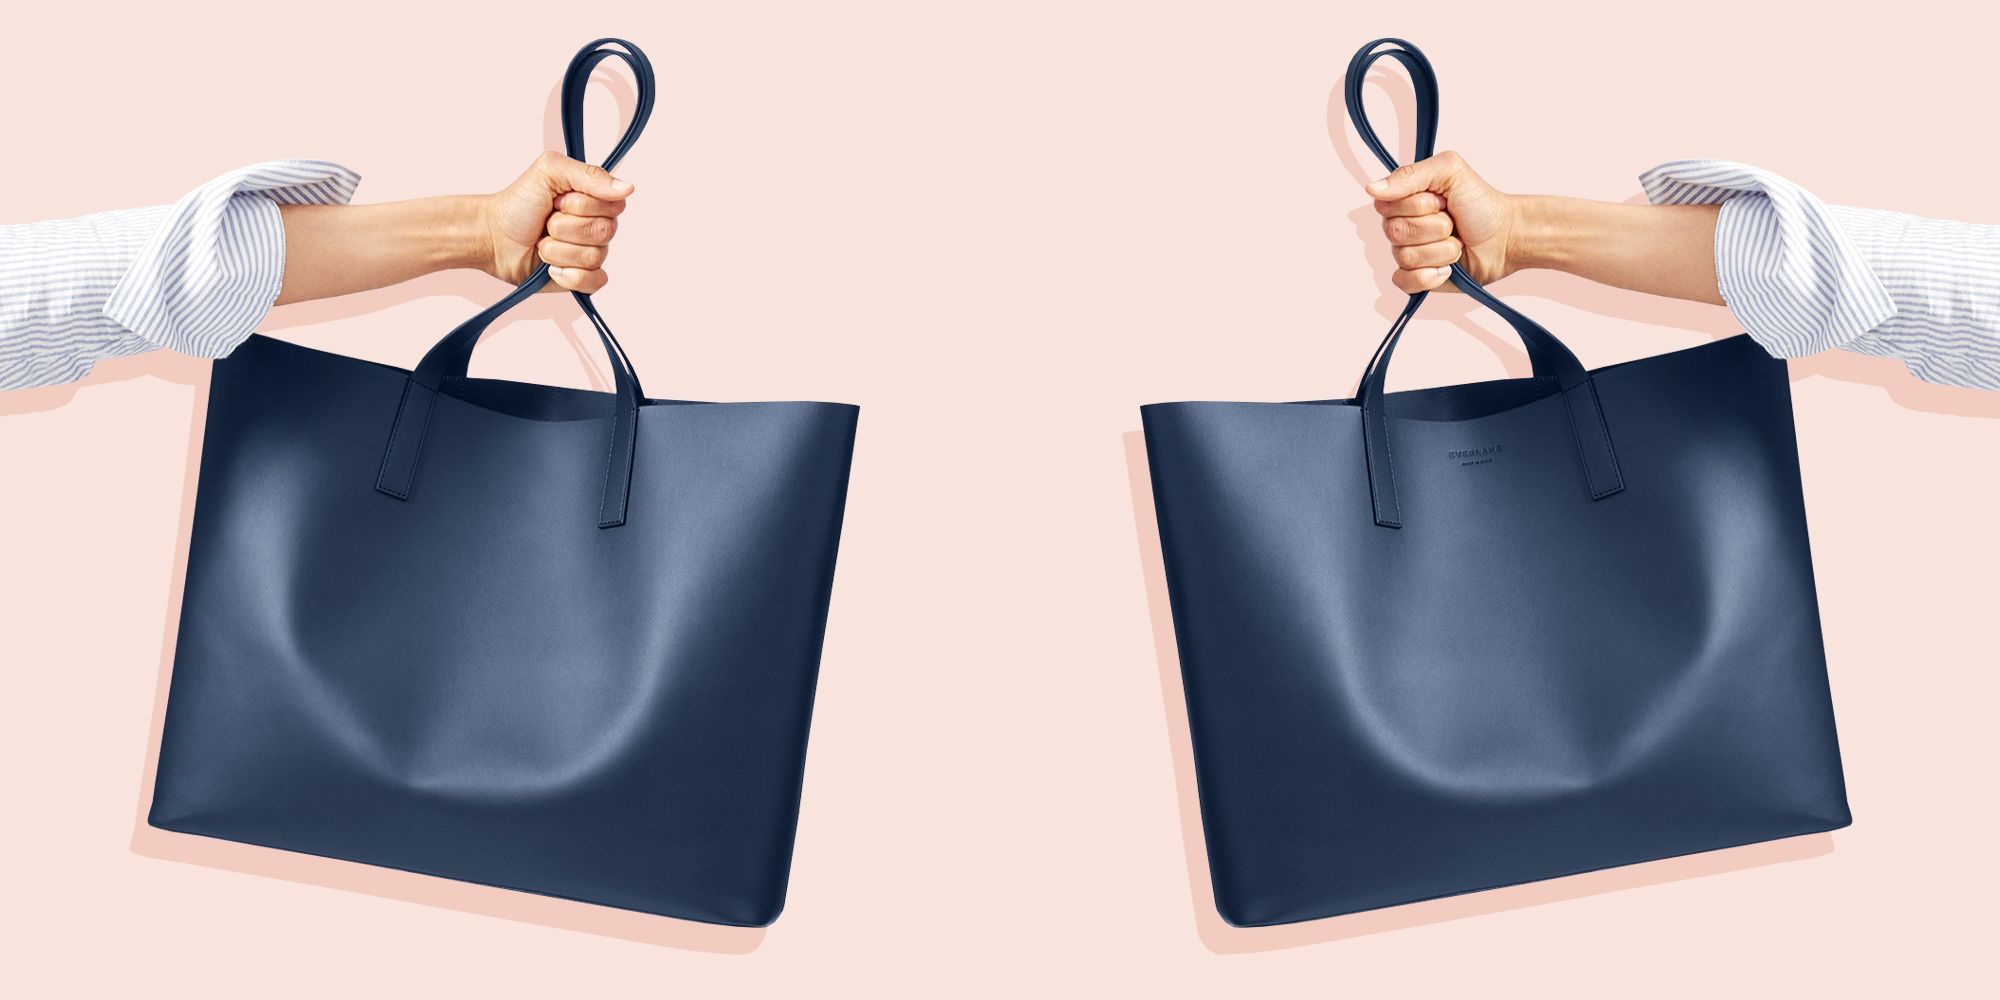 The 12 Best Work Bags for Women of 2023